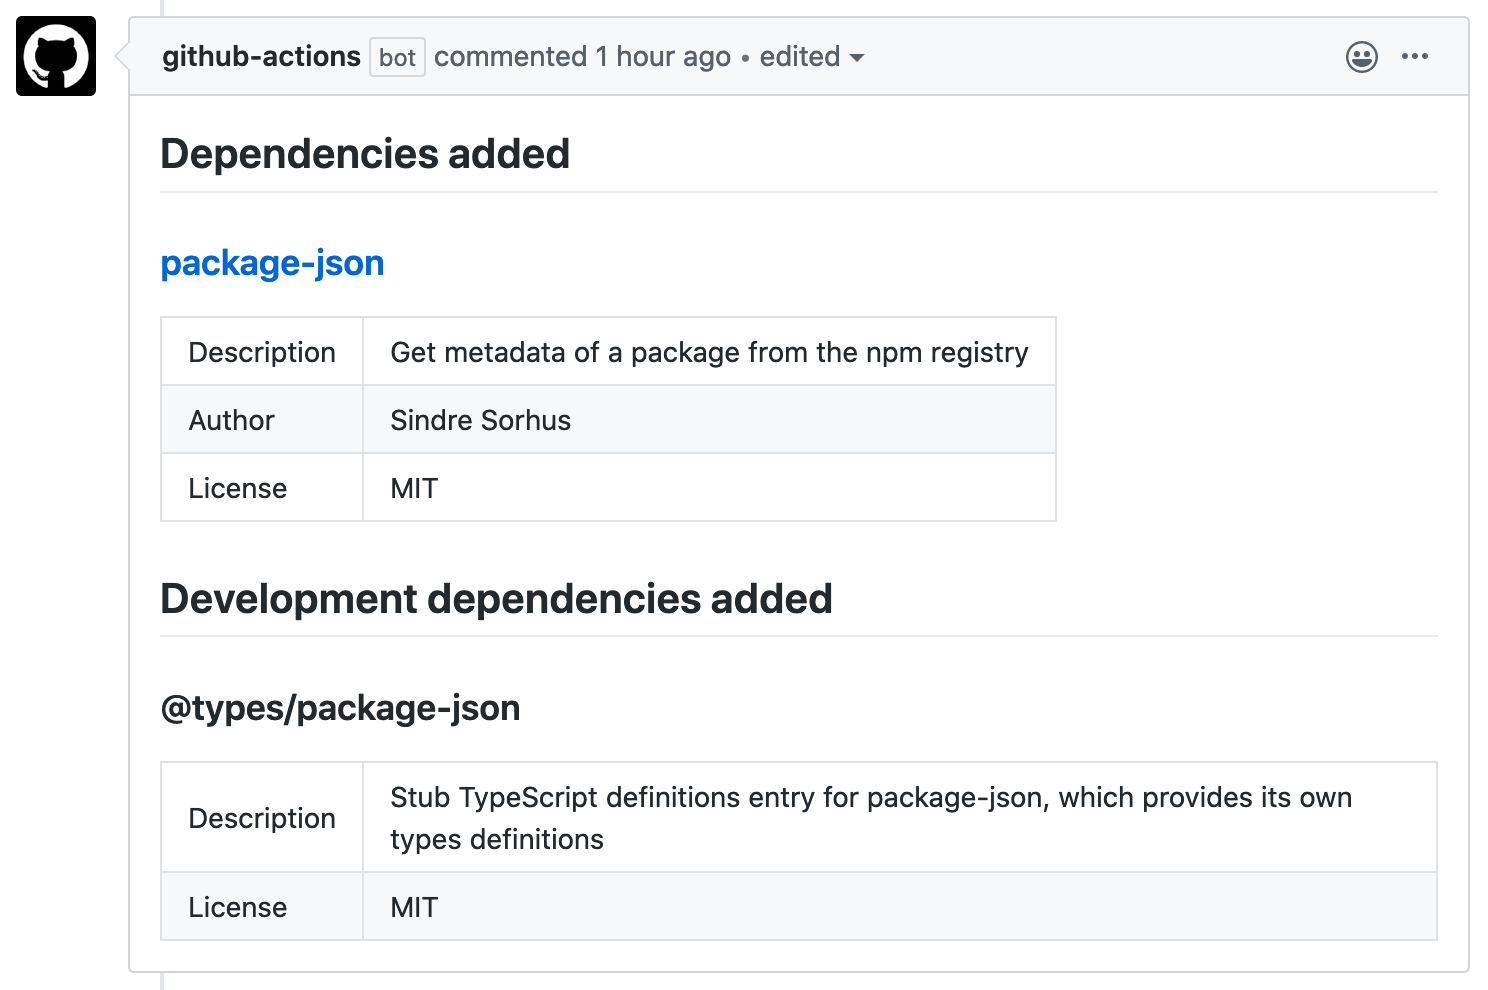 Message generated by the GitHub Action showing a list of new dependencies with a table showing some information like author, description and date of the last update for each dependency